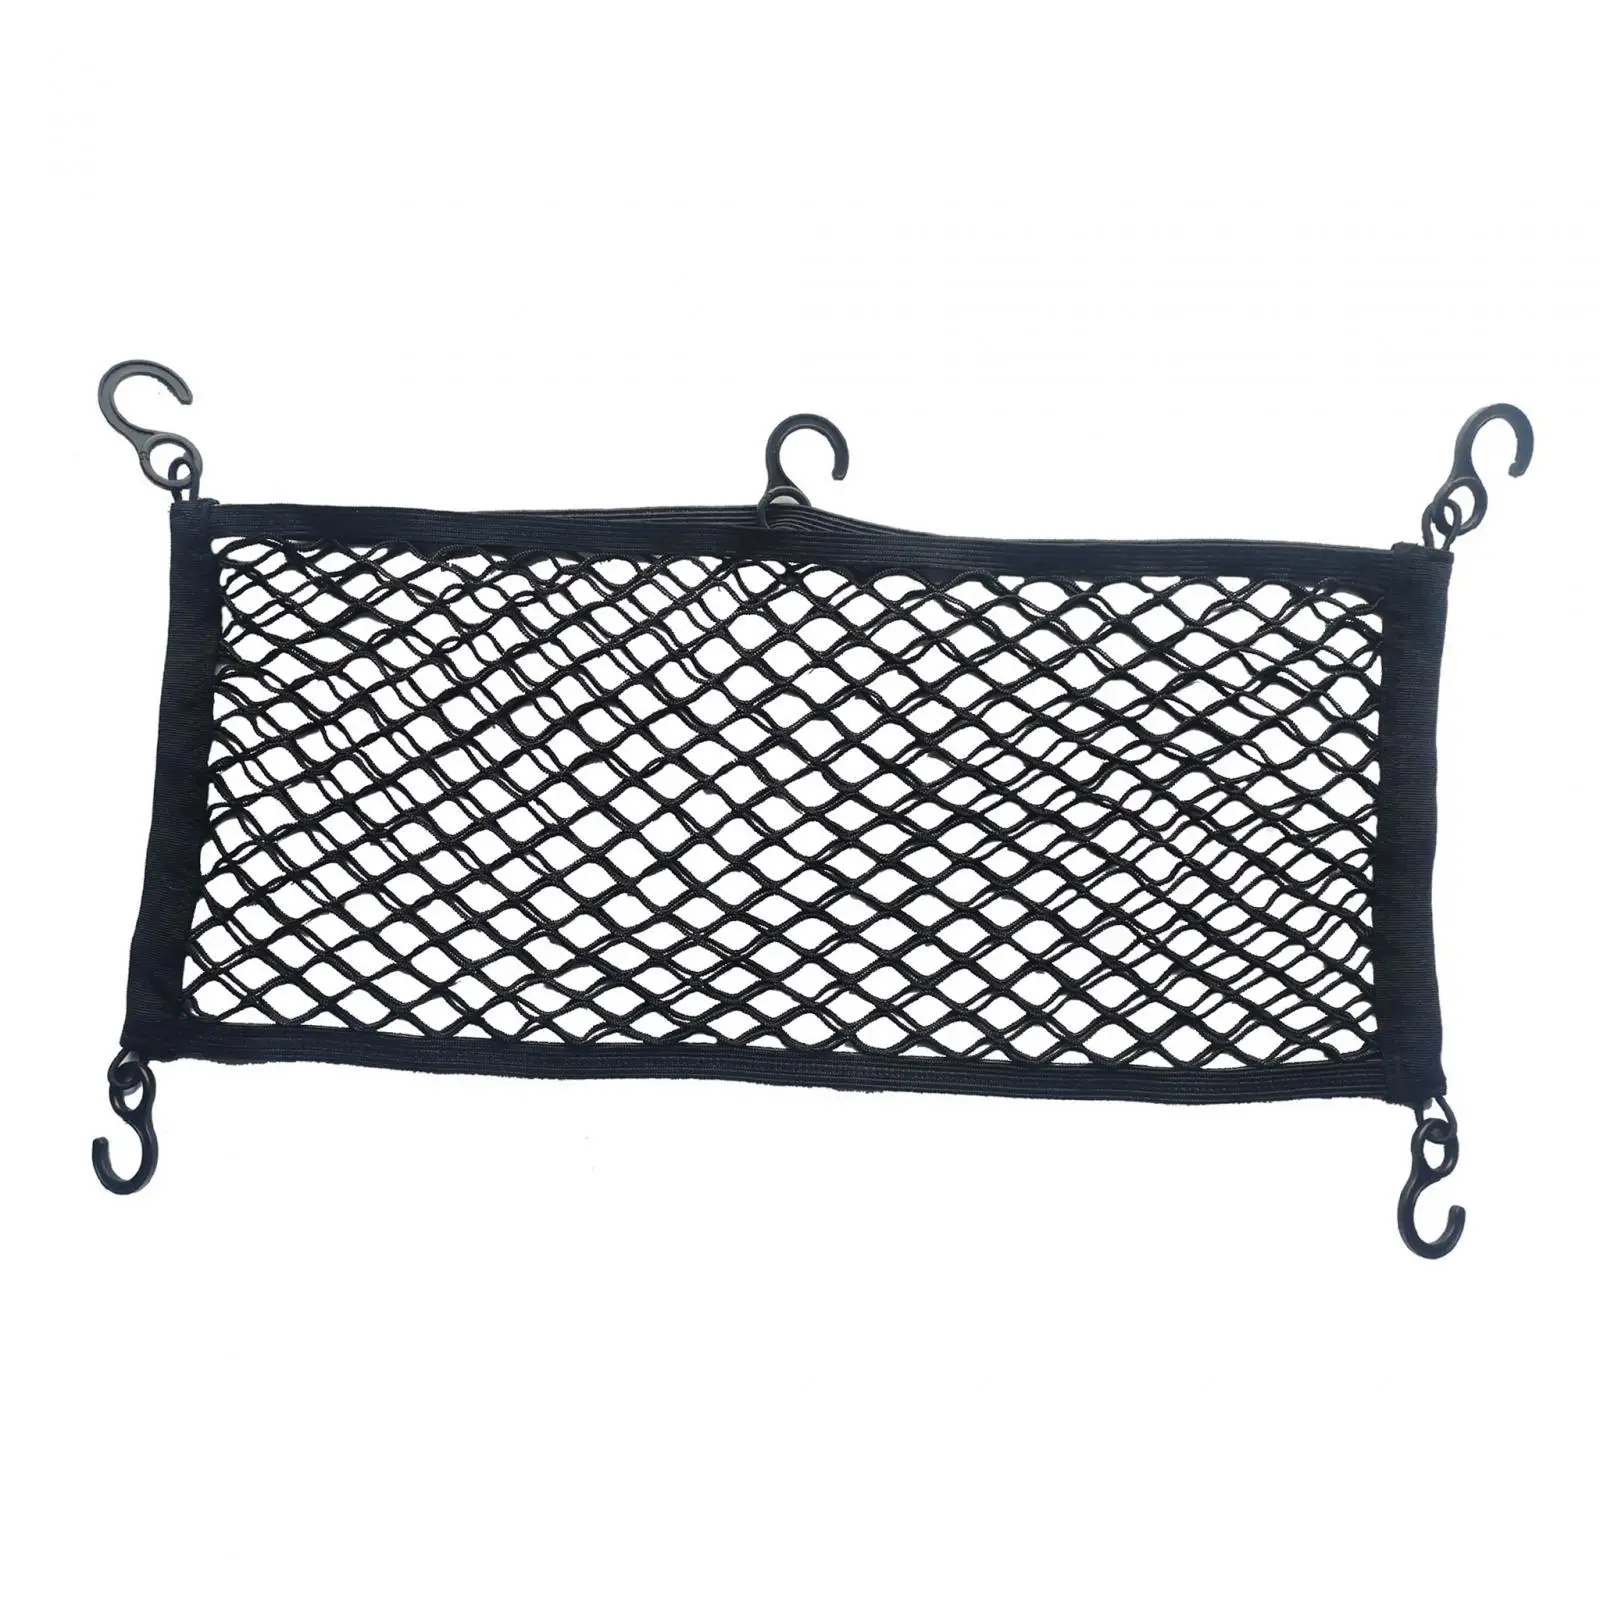 Folding Trolley Carts Net Camping Carts Net for Trunk Toys and Snacks